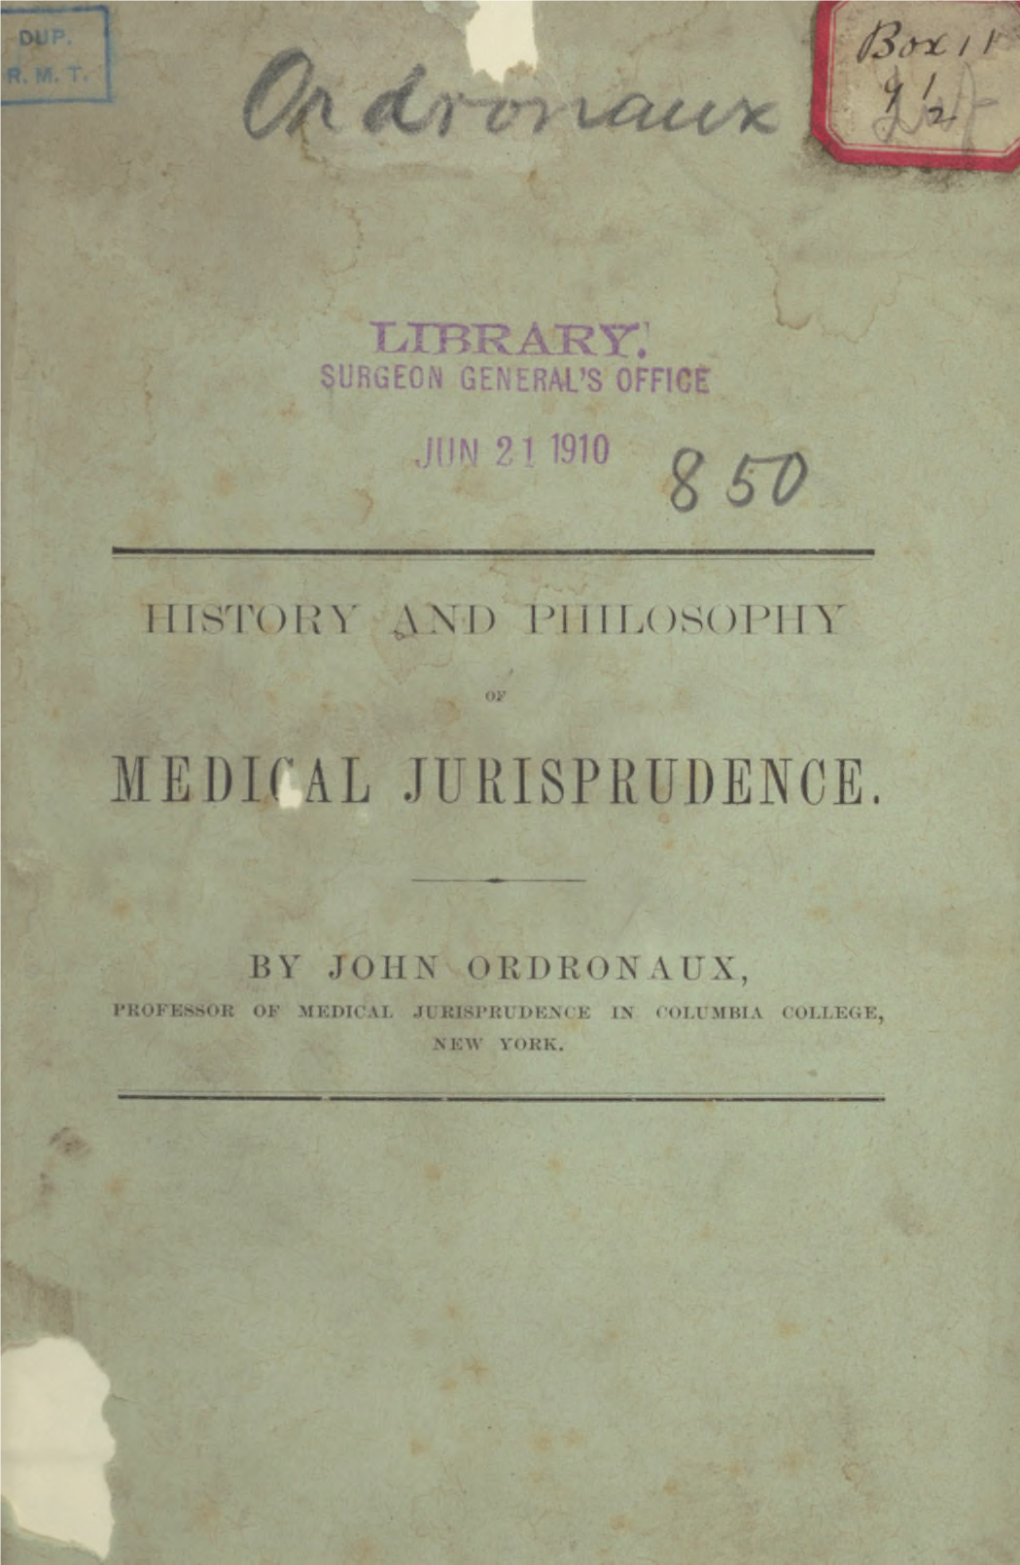 History and Philosophy of Medical Jurisprudence